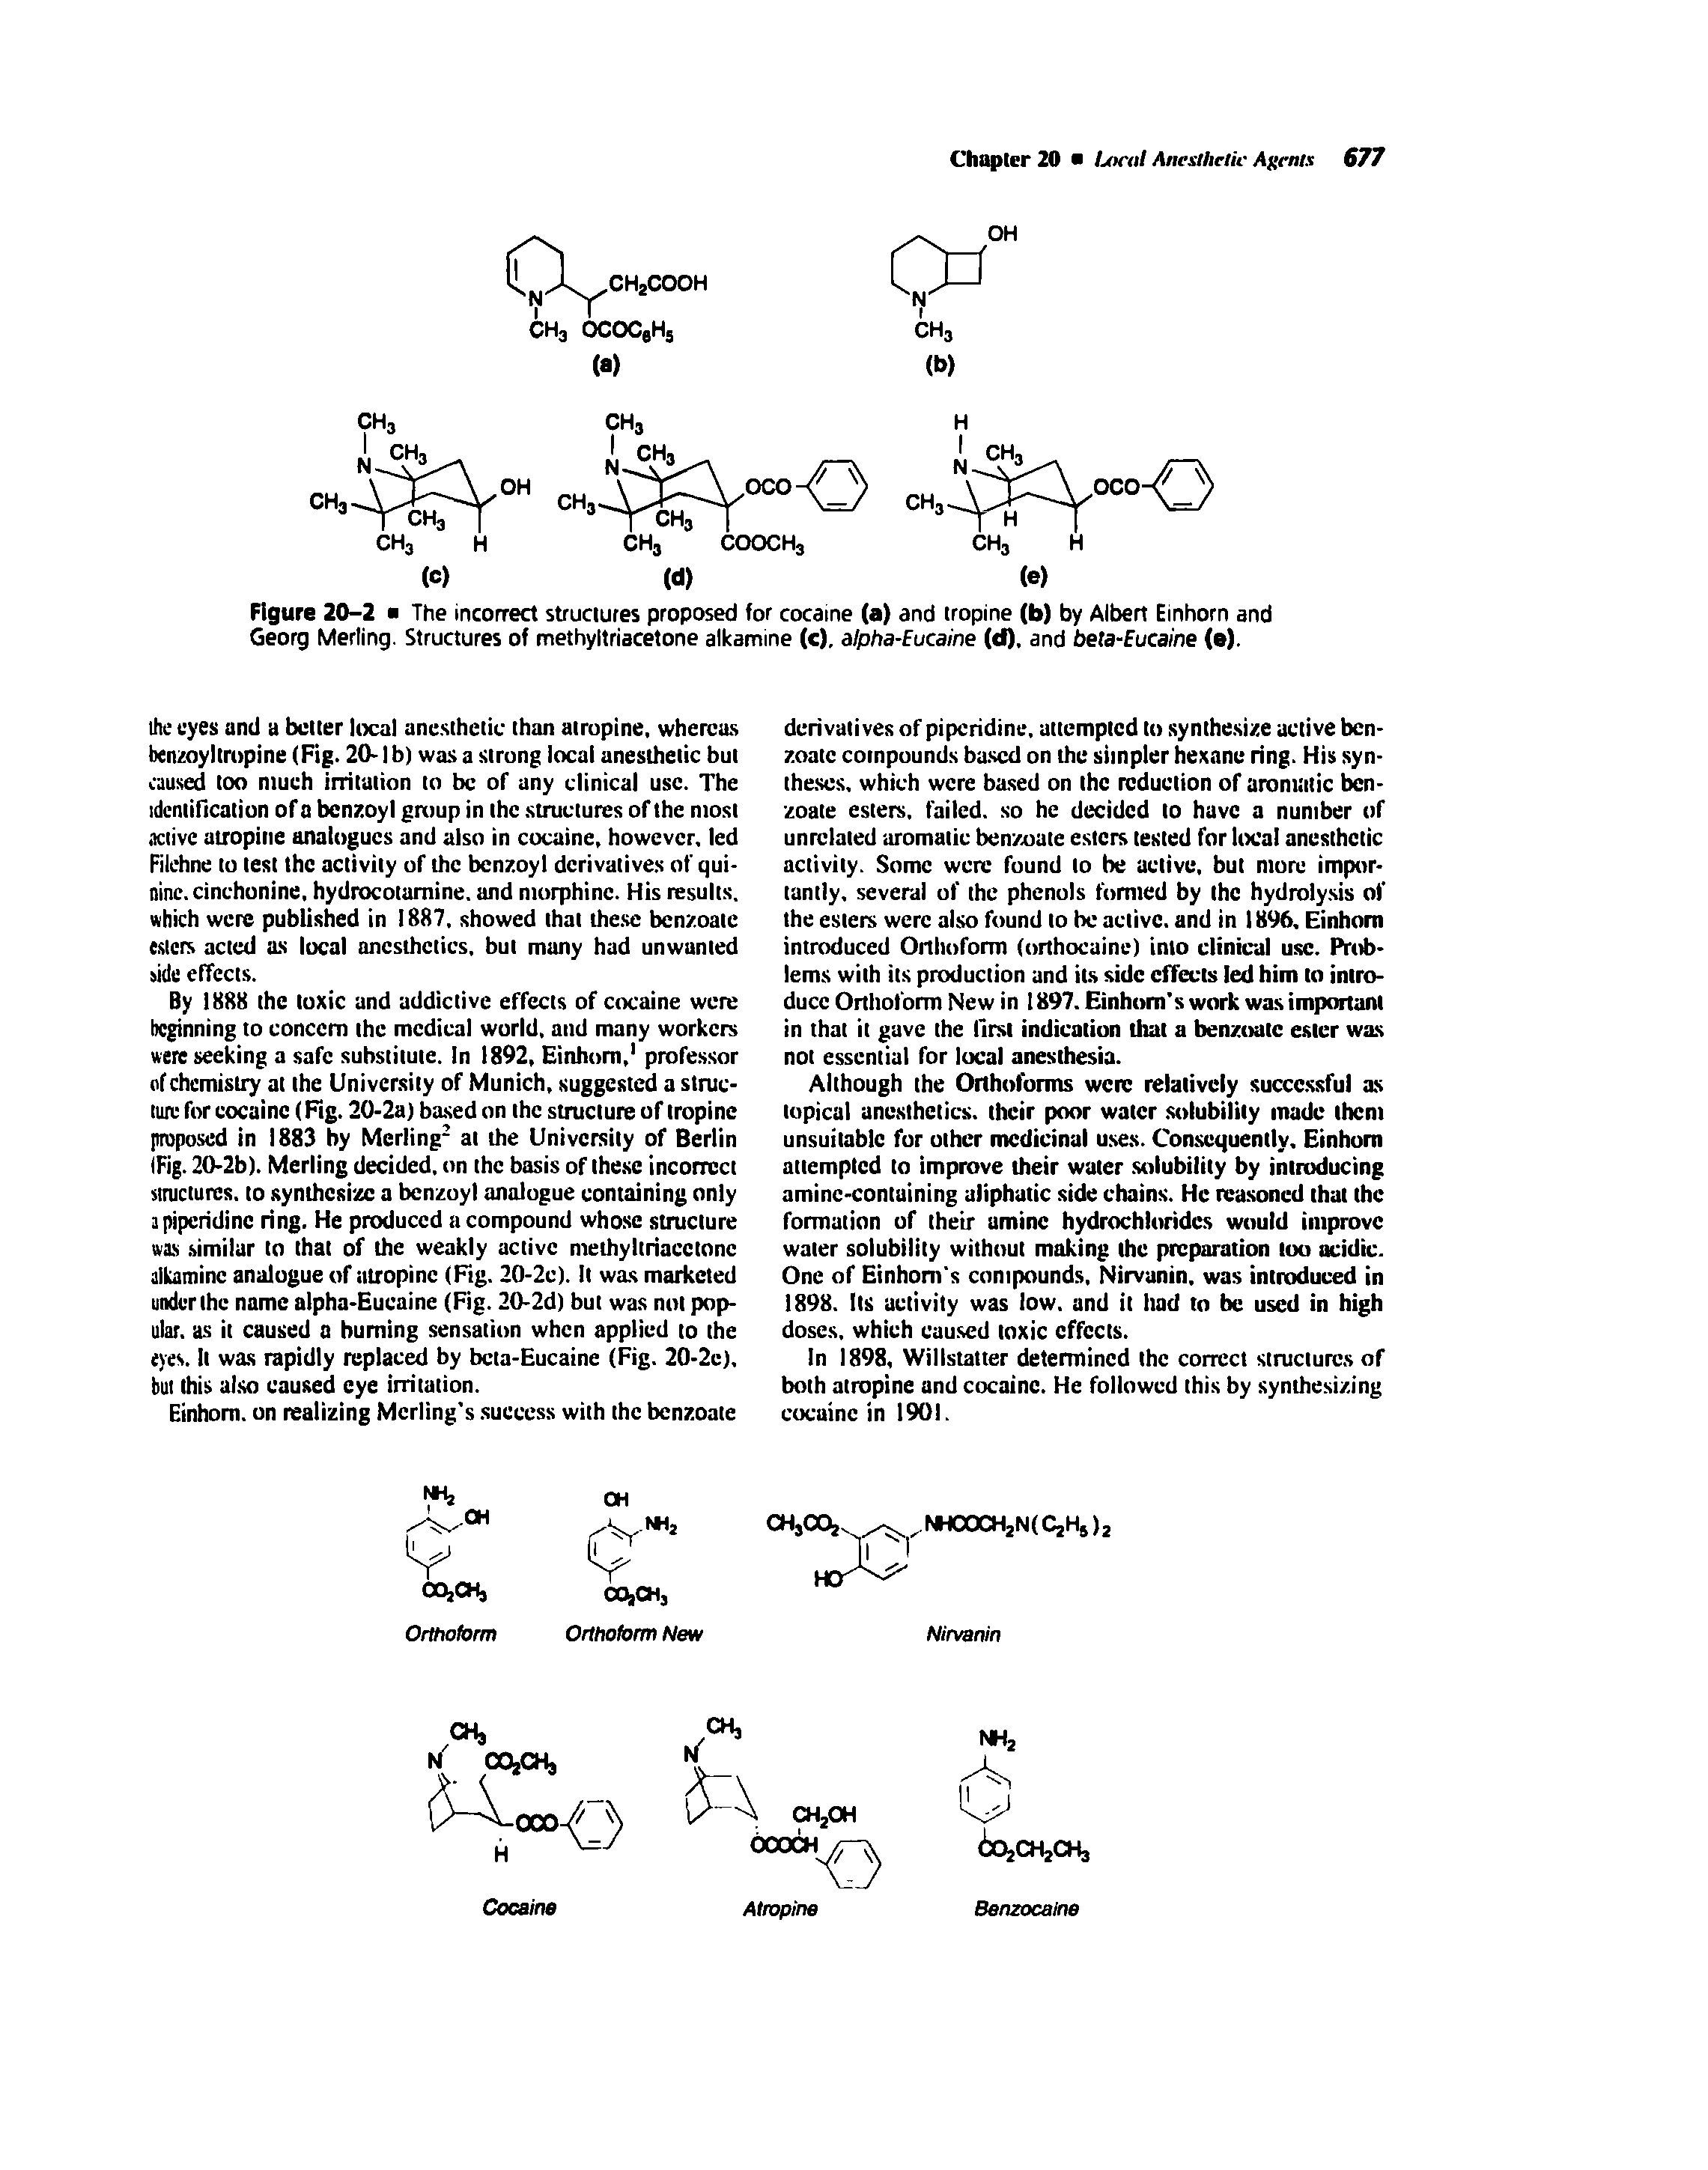 Figure 20-2 The incorrect structures proposed for cocaine (a) and tropine (b) by Albert Einhorn and Georg Merling. Structures of methyltrlacetone alkamine (c). alpha-Eucaine (d). and beta-Eucaine (e).